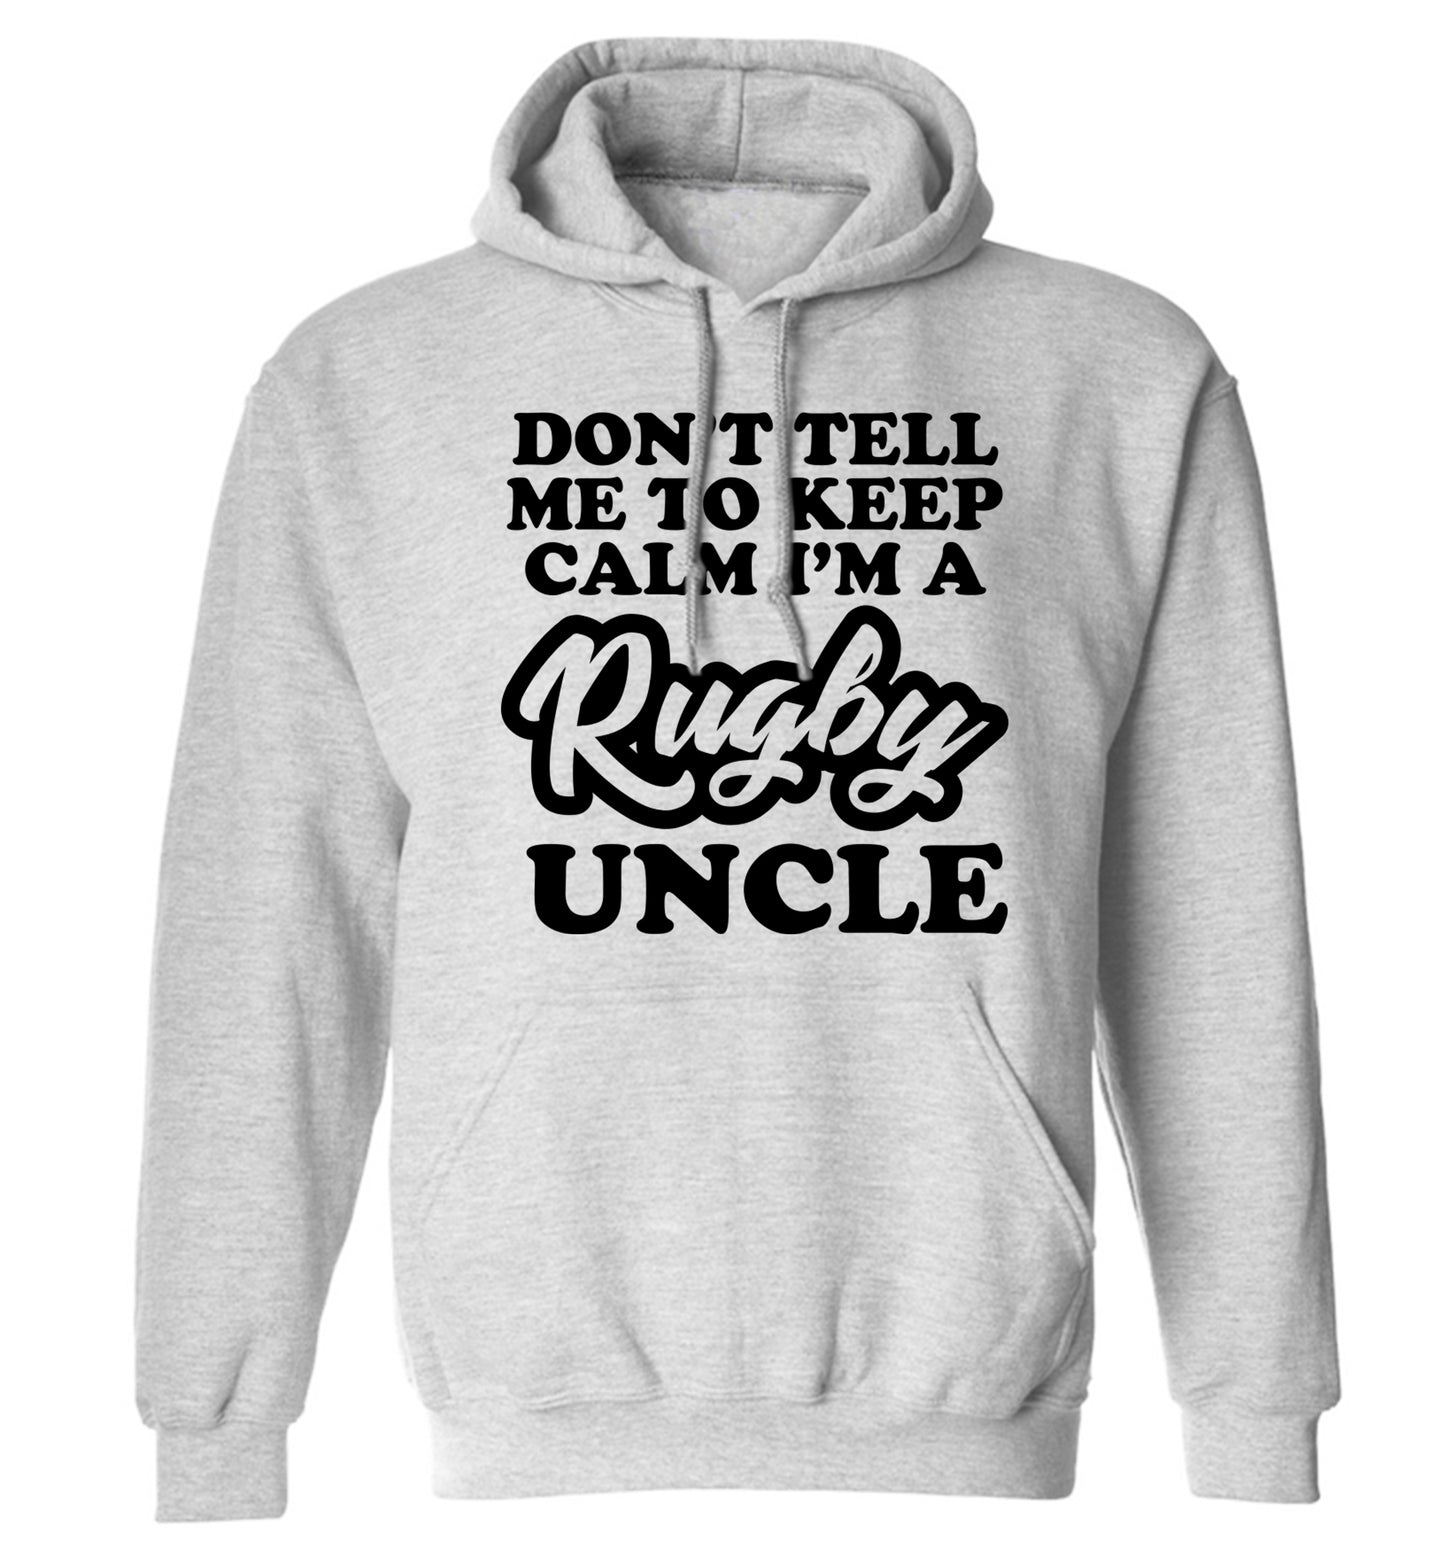 Don't tell me to keep calm I'm a rugby uncle adults unisex grey hoodie 2XL